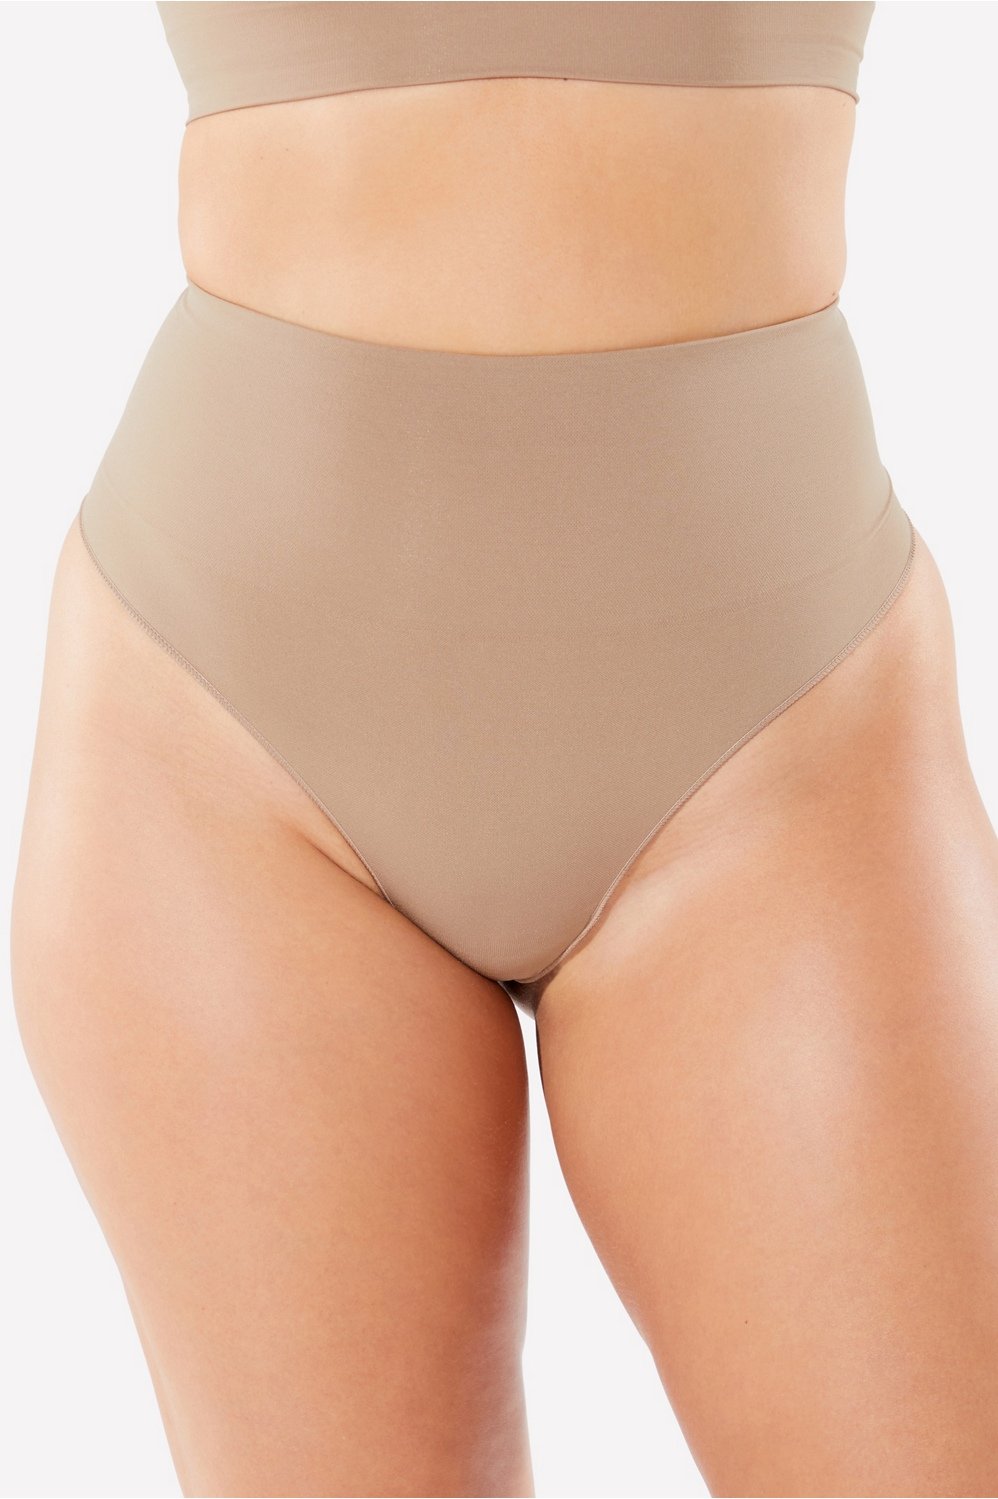 High waisted thong • Compare & find best prices today »